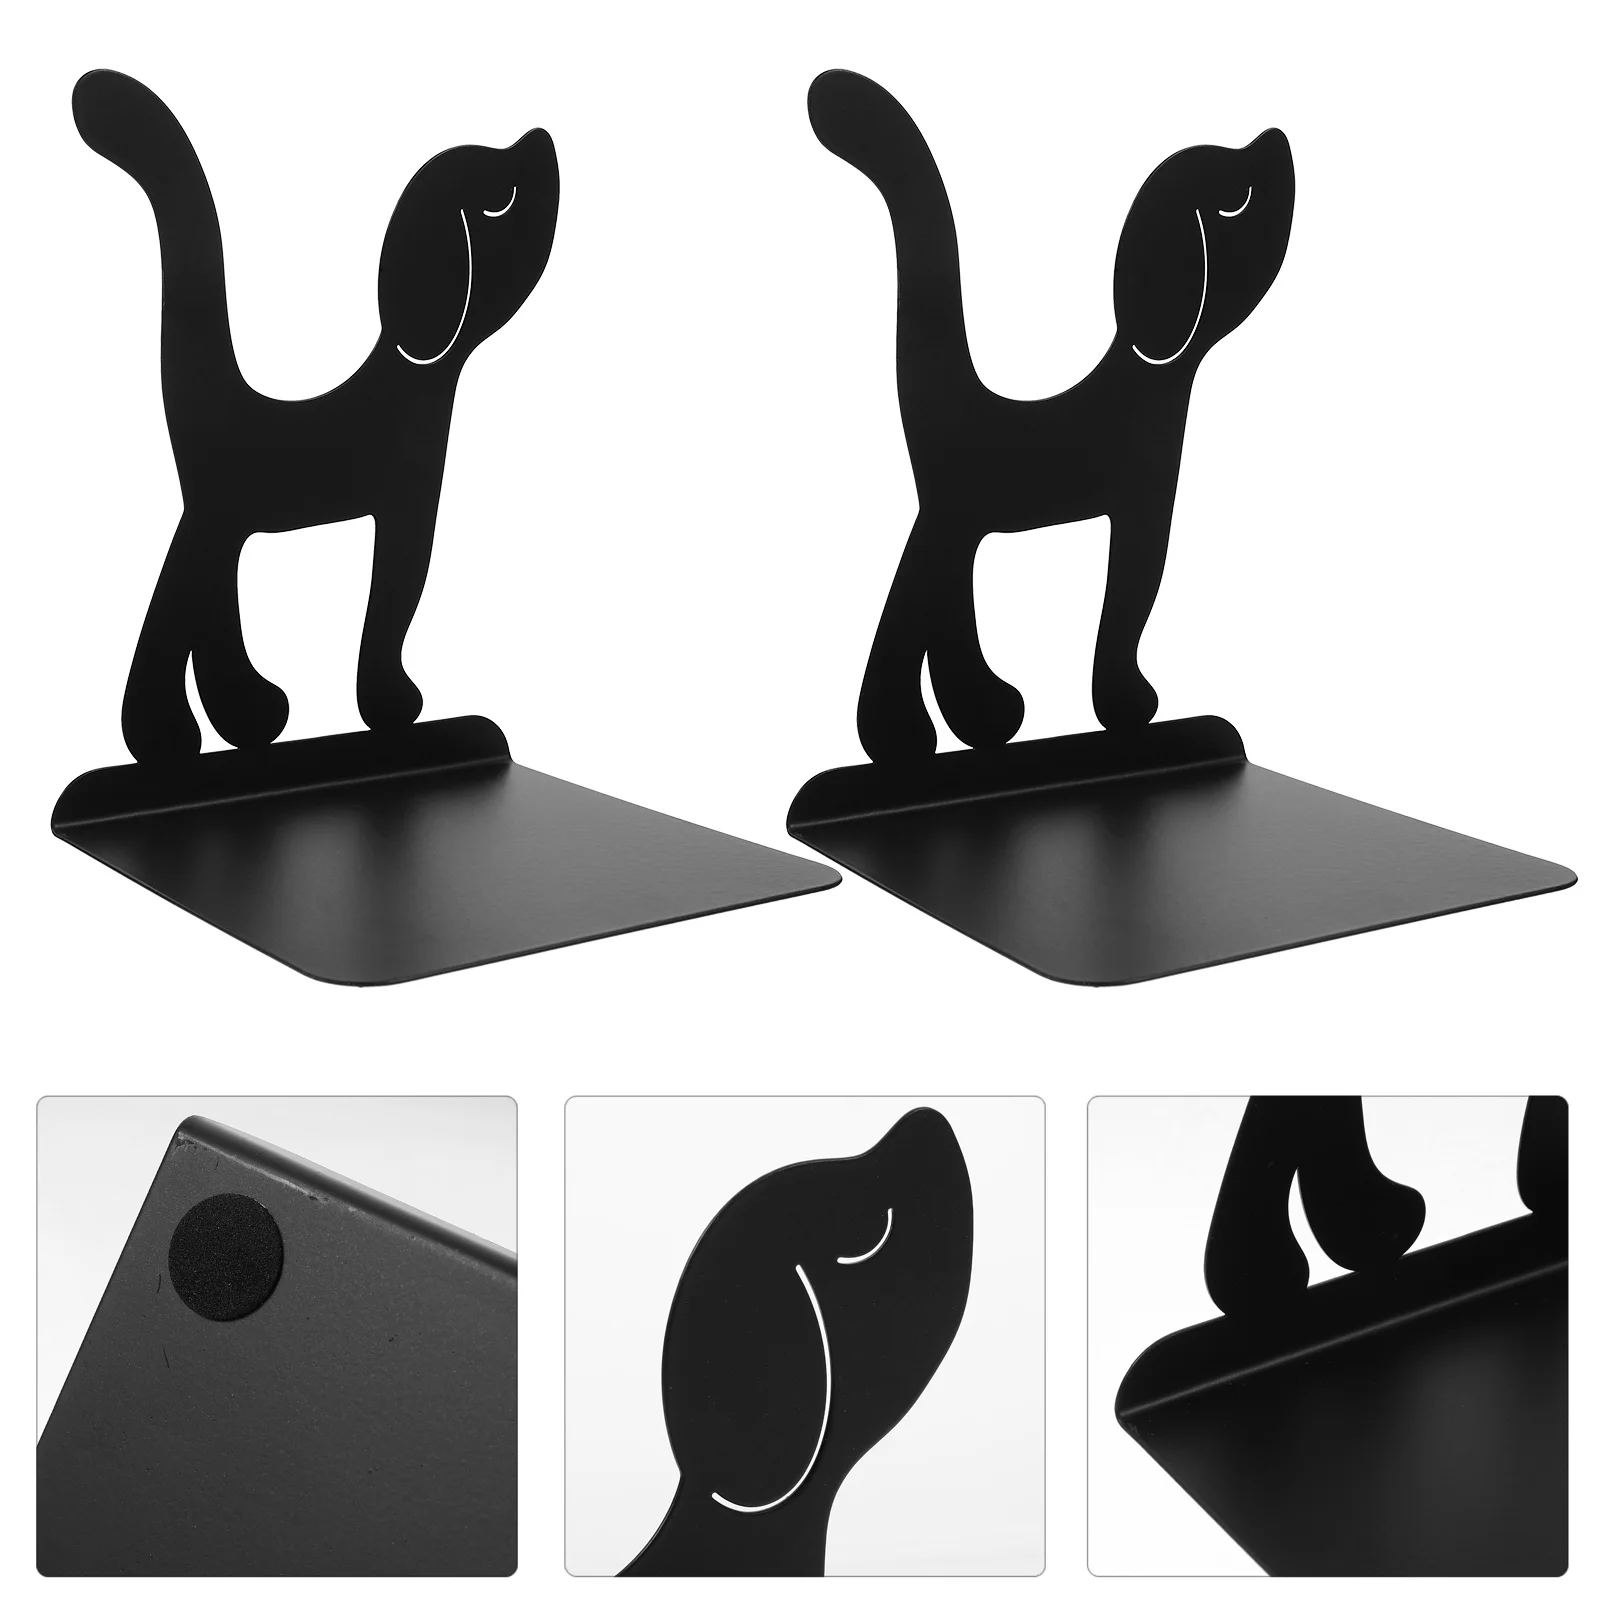 2pcs Non-skid Bookends Metal Book Stoppers Creative Book Holders Office Table Bookends